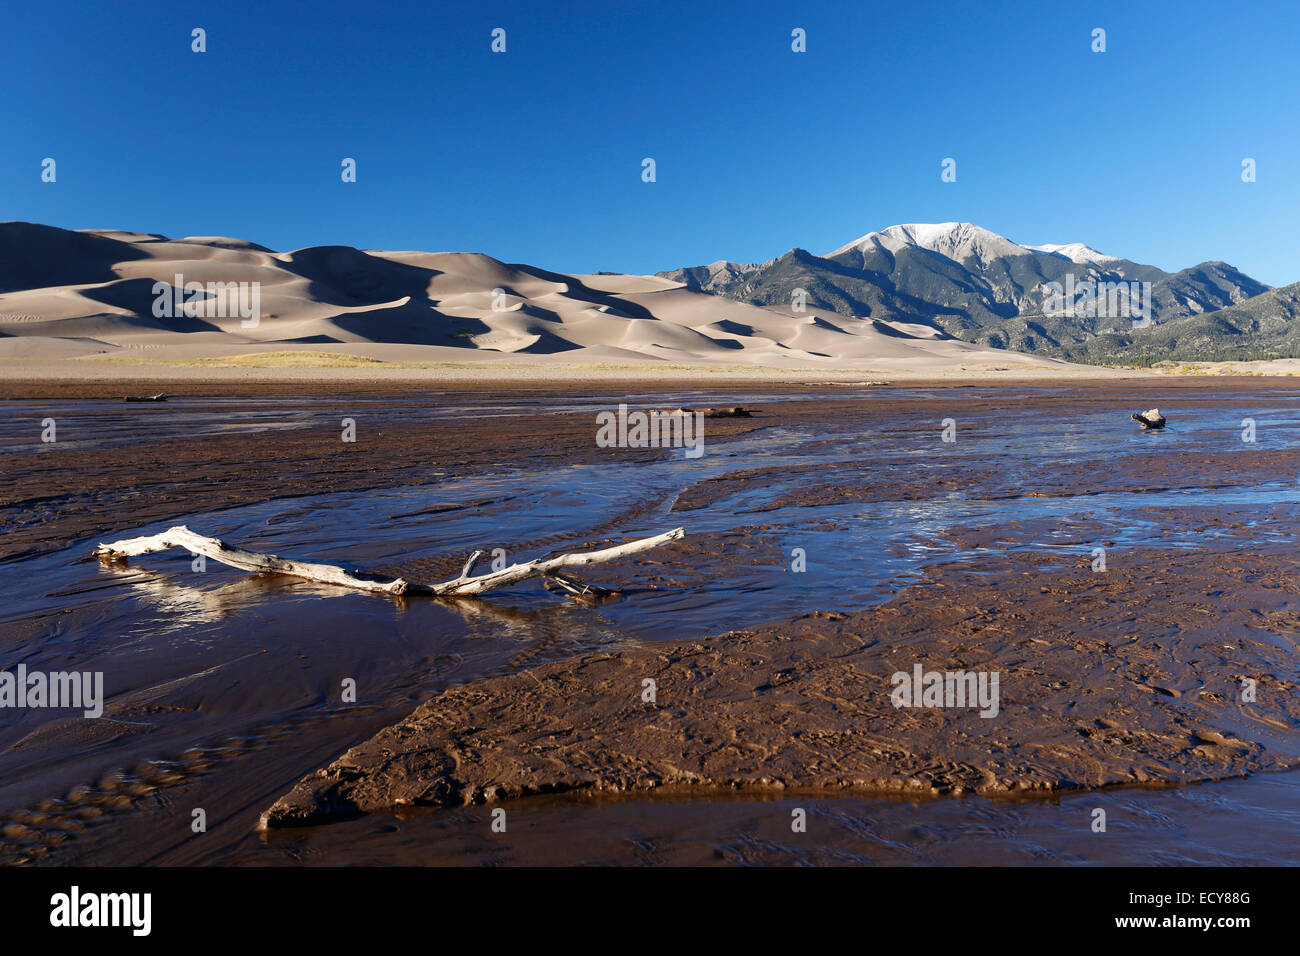 Medano Creek, Great Sand Dunes National Park and Preserve, Colorado, United States Banque D'Images